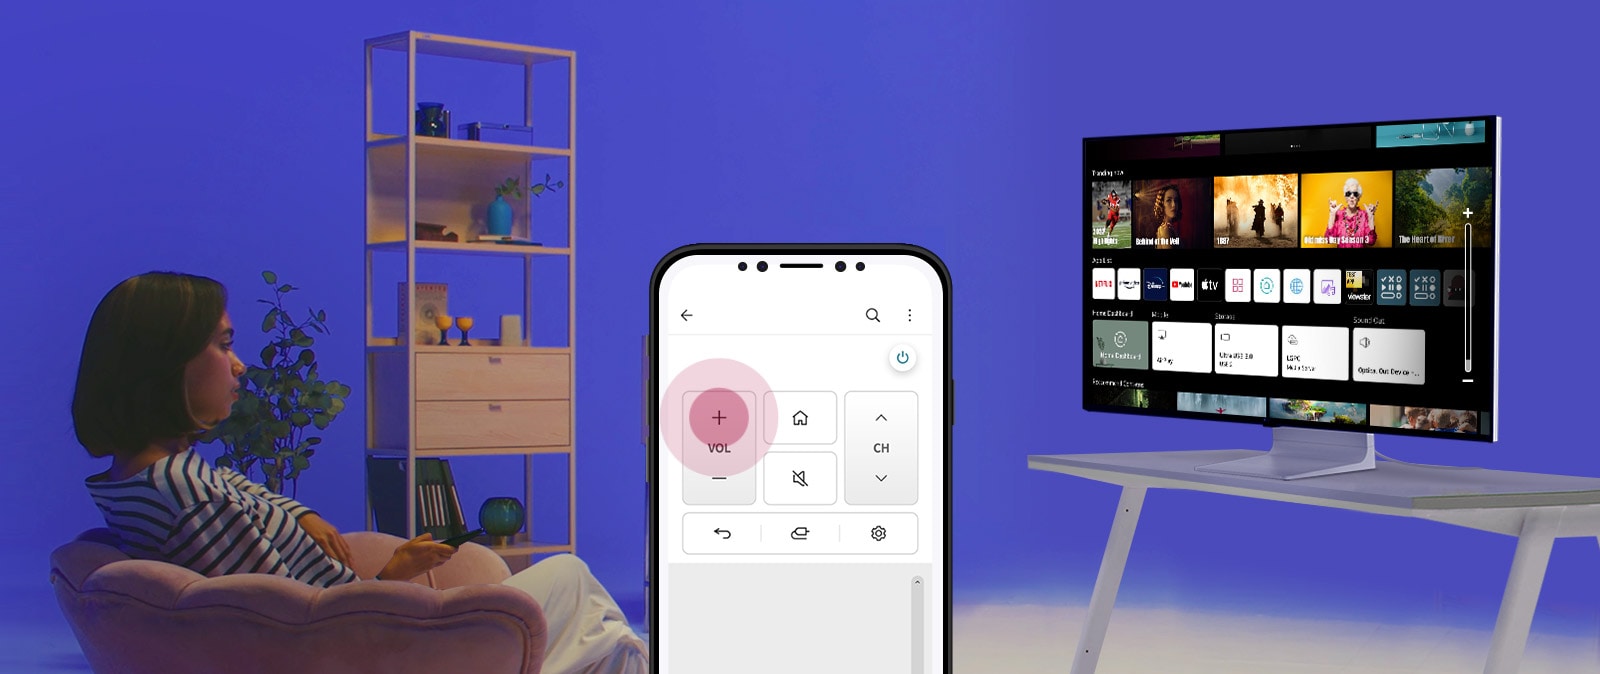 Easy Control with LG ThinQ App & Magic Remote.